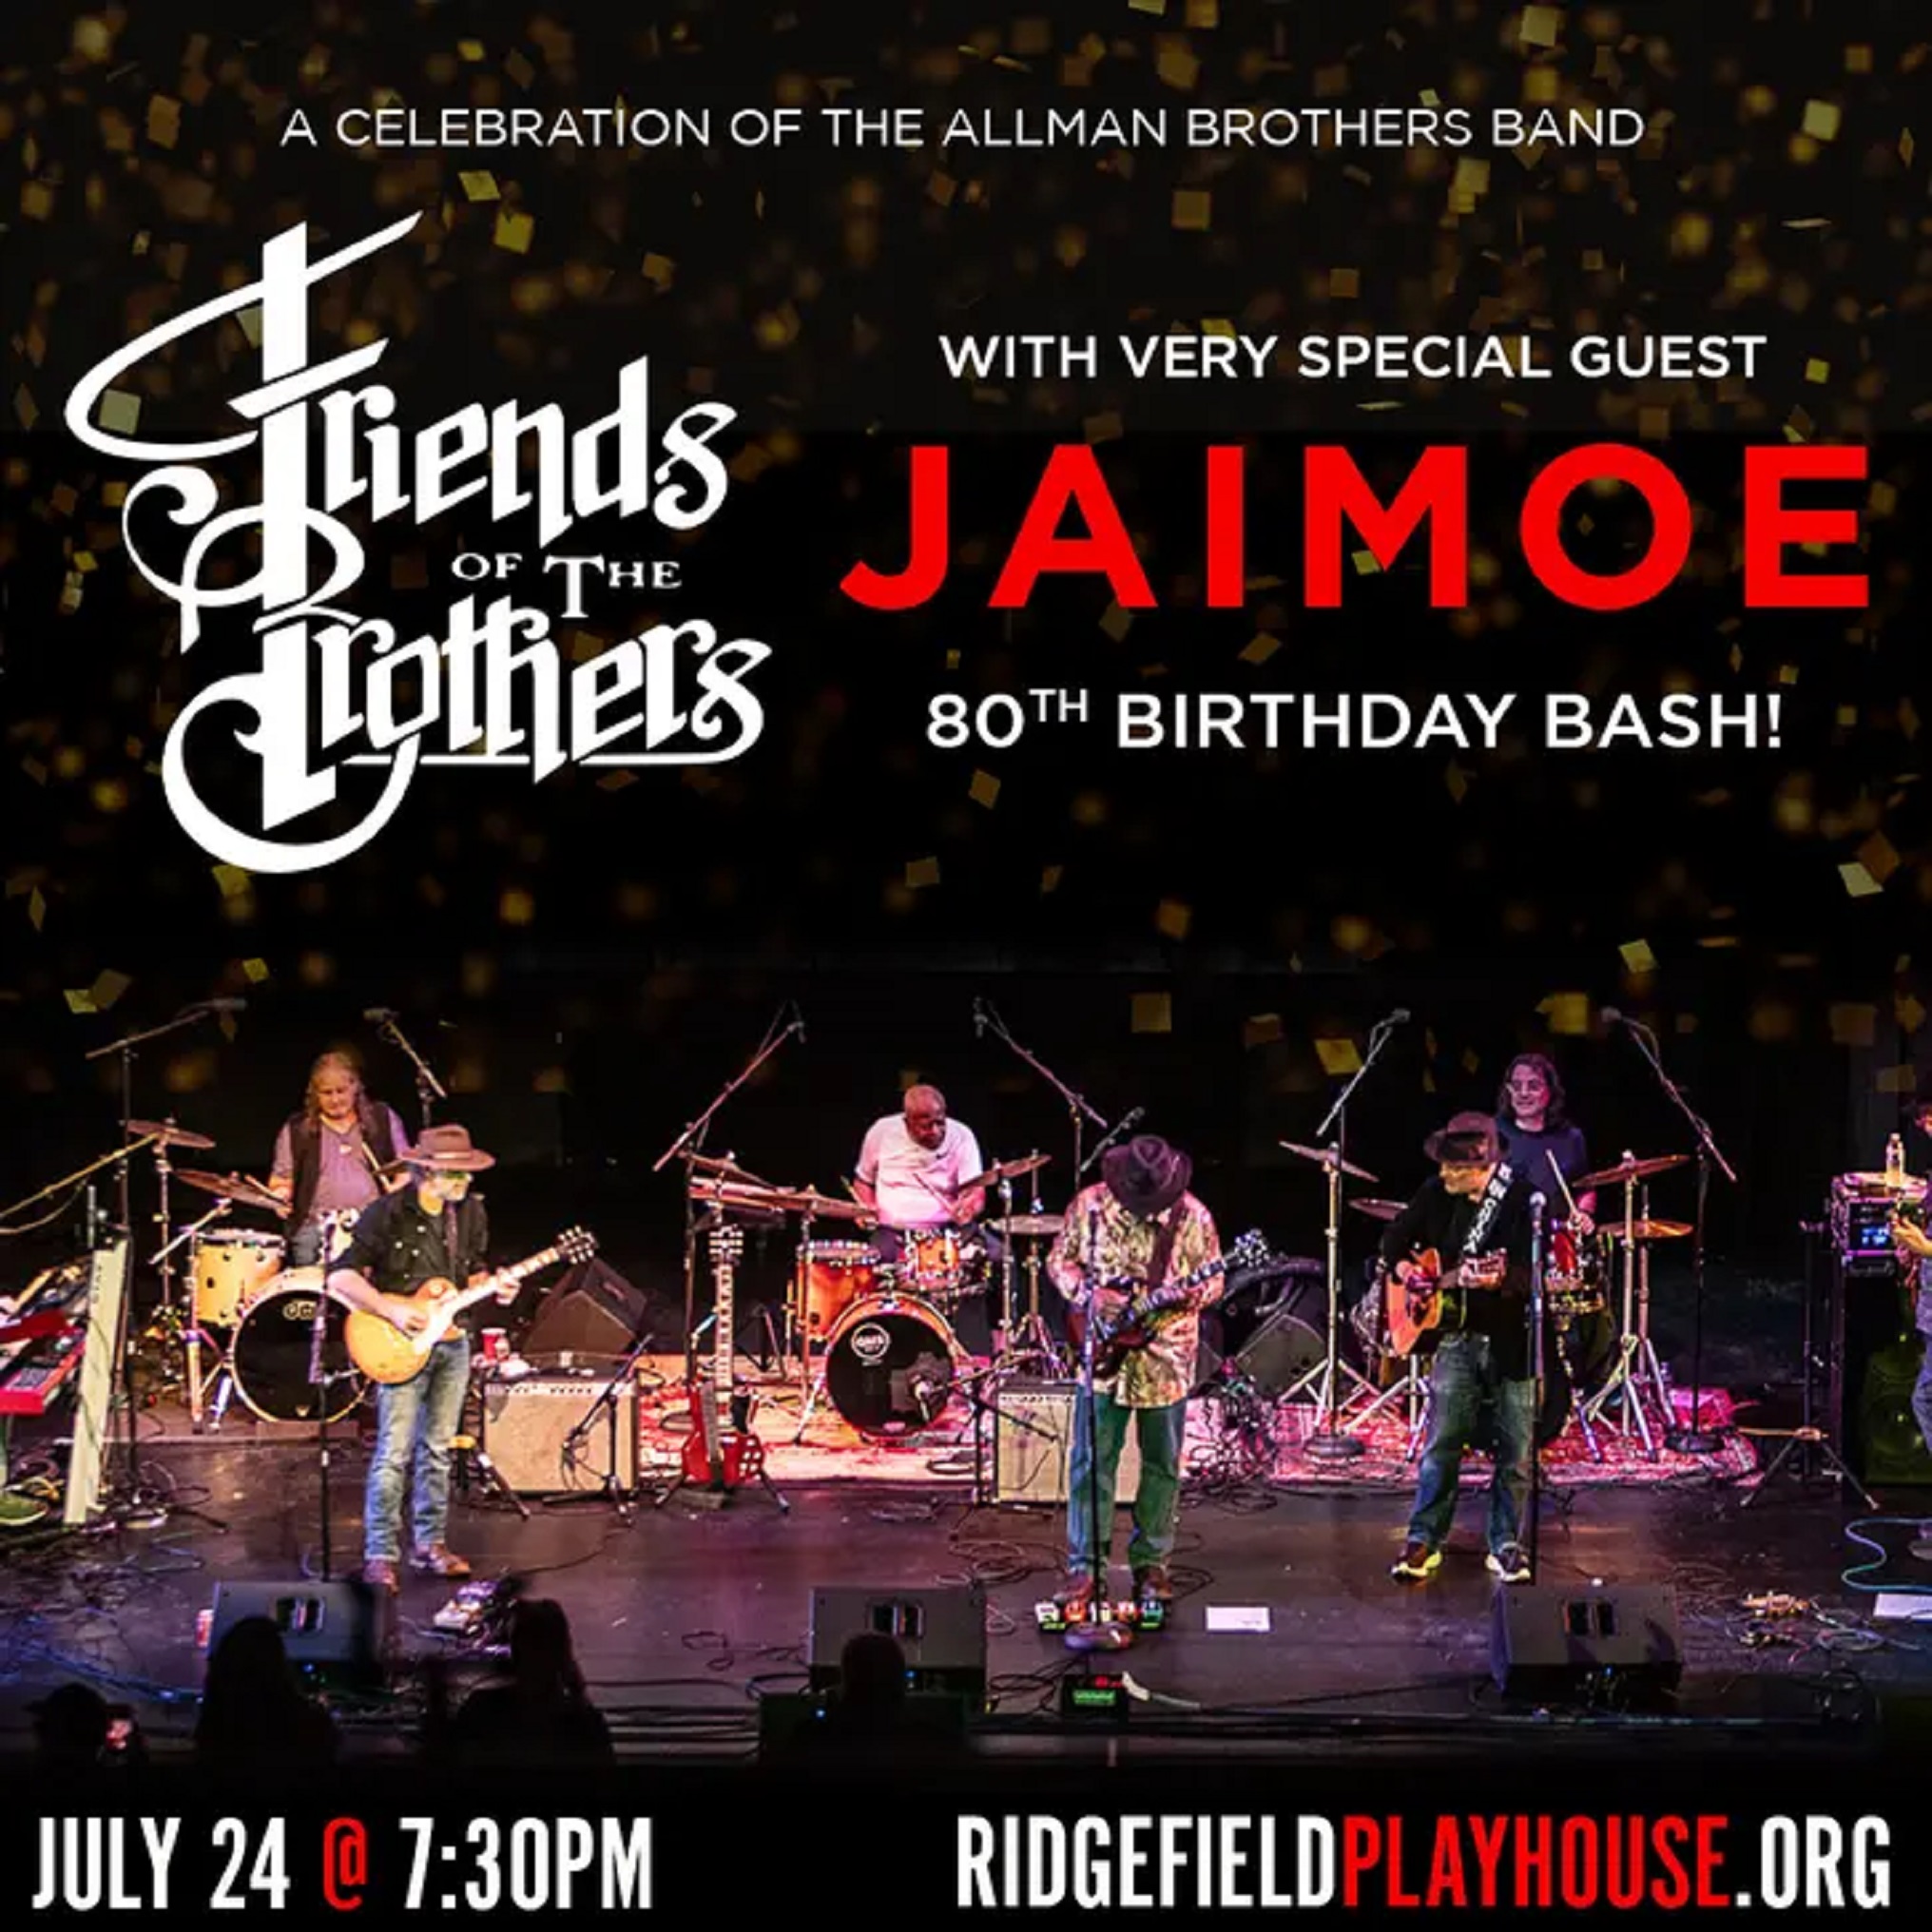 Jaimoe, founding member of the Allman Brothers Band, to play a series of shows with Friends of the Brothers as he celebrates his 80th birthday